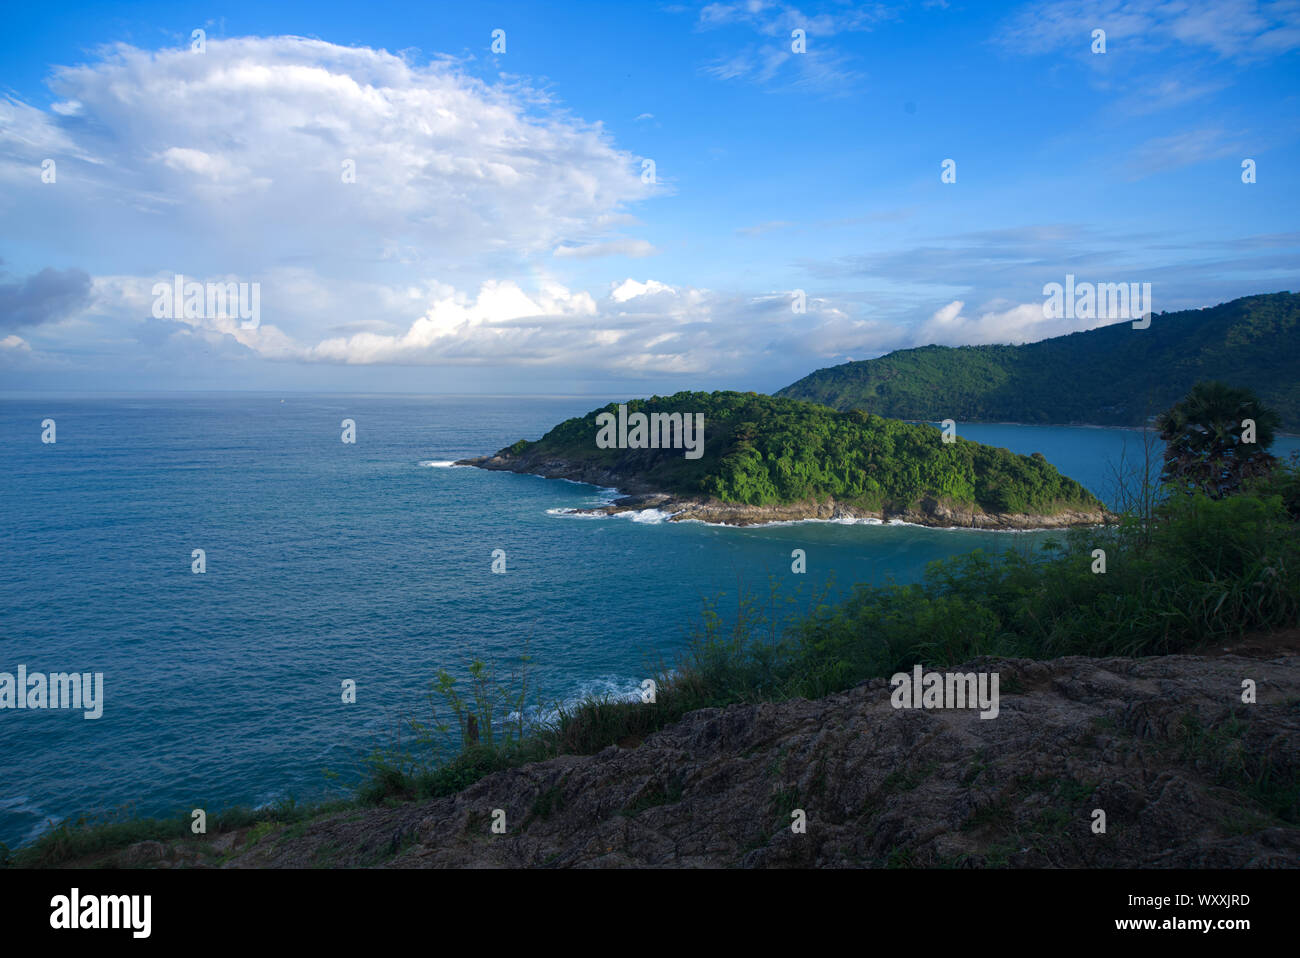 Cloudy day at Promthep Cape in Phuket Thailand Stock Photo